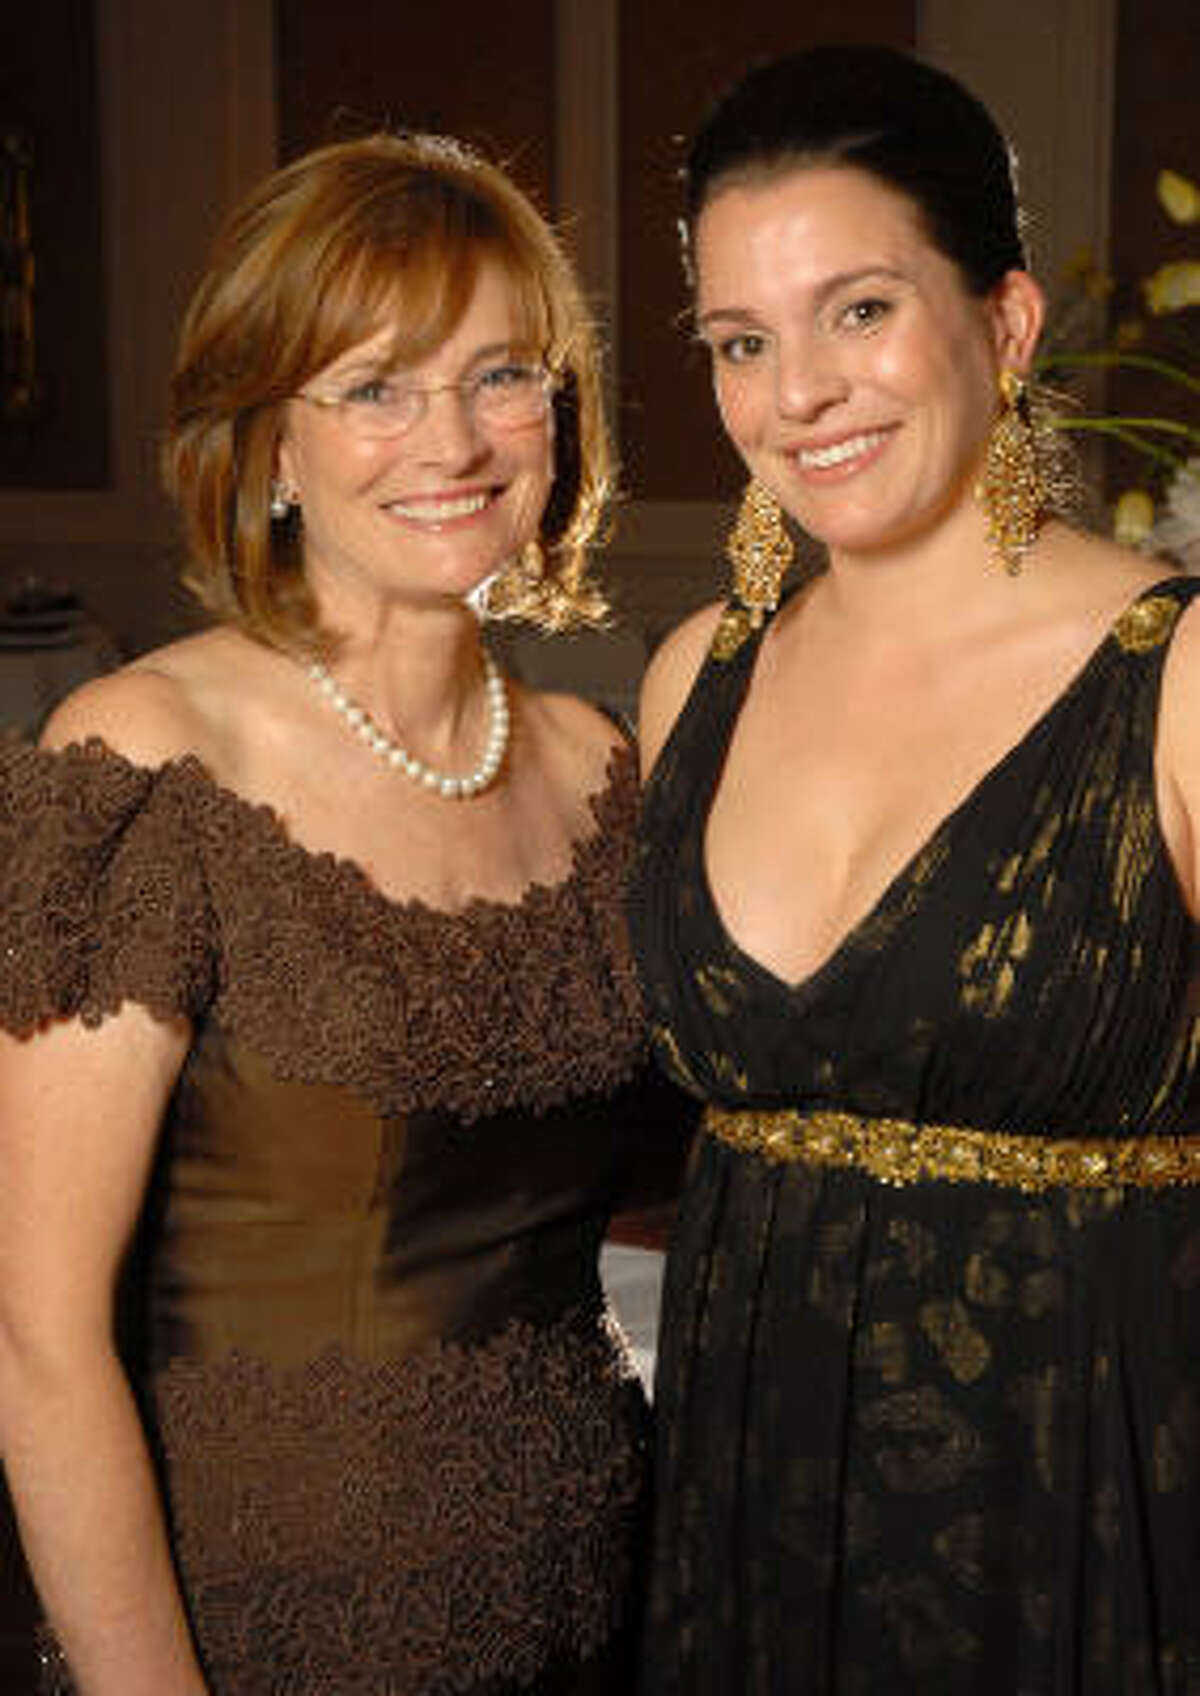 Pearl Ball chairs Bobbie Nau and her daughter Victoria Johnson at the River Oaks Country Club.